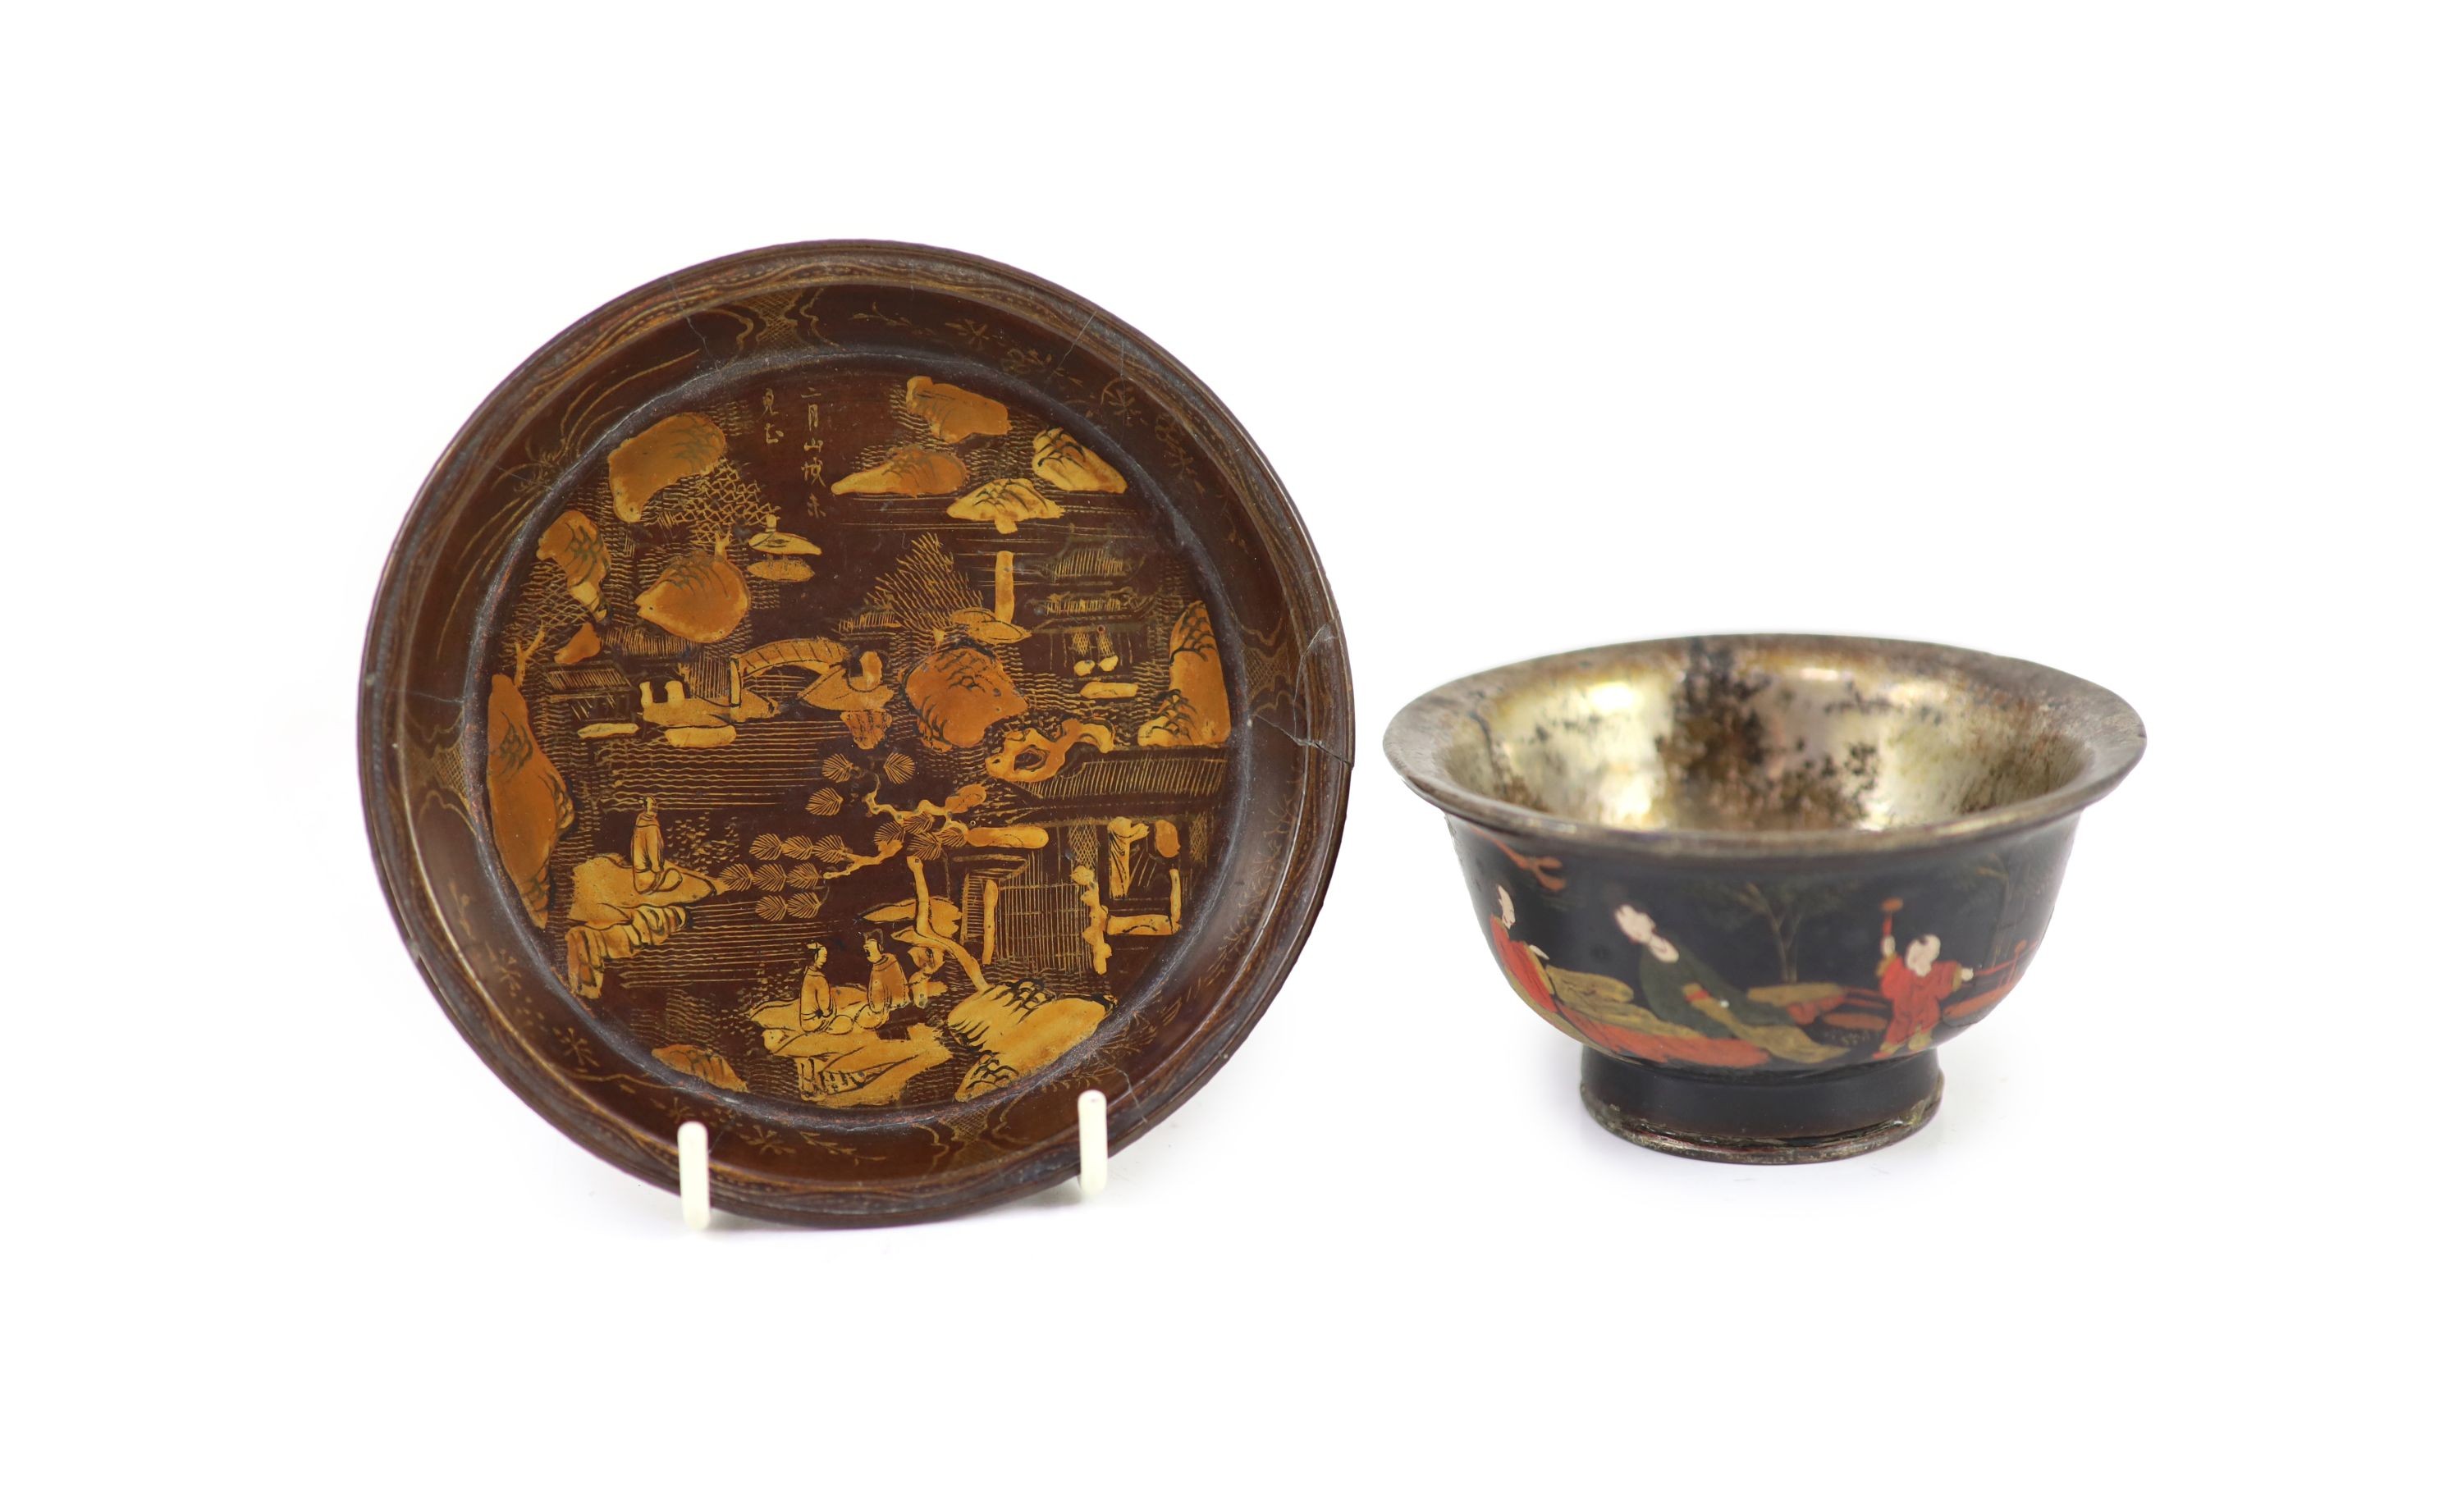 A Chinese late Ming lacquer cup and a similar dish, 17th century